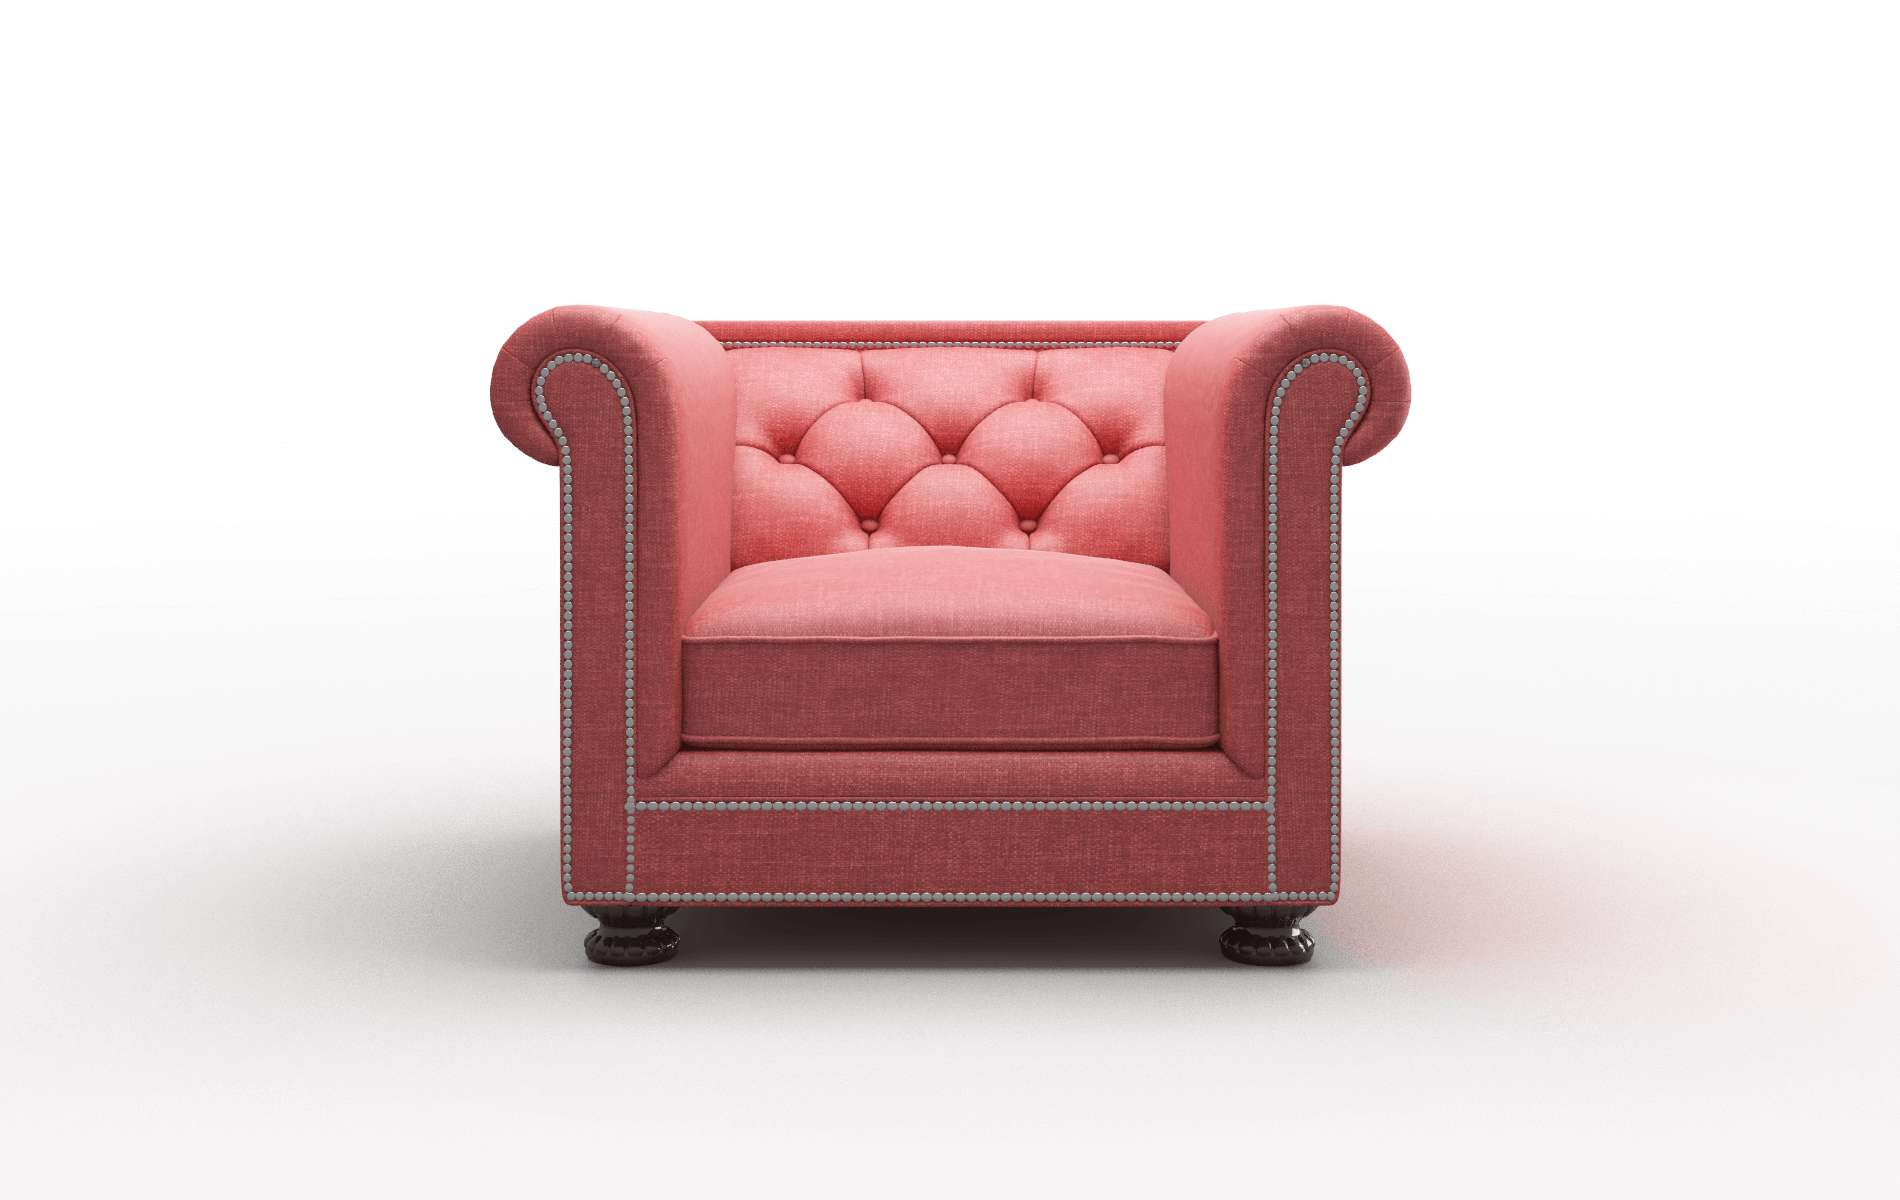 Athens Royale Berry Chair espresso legs 1